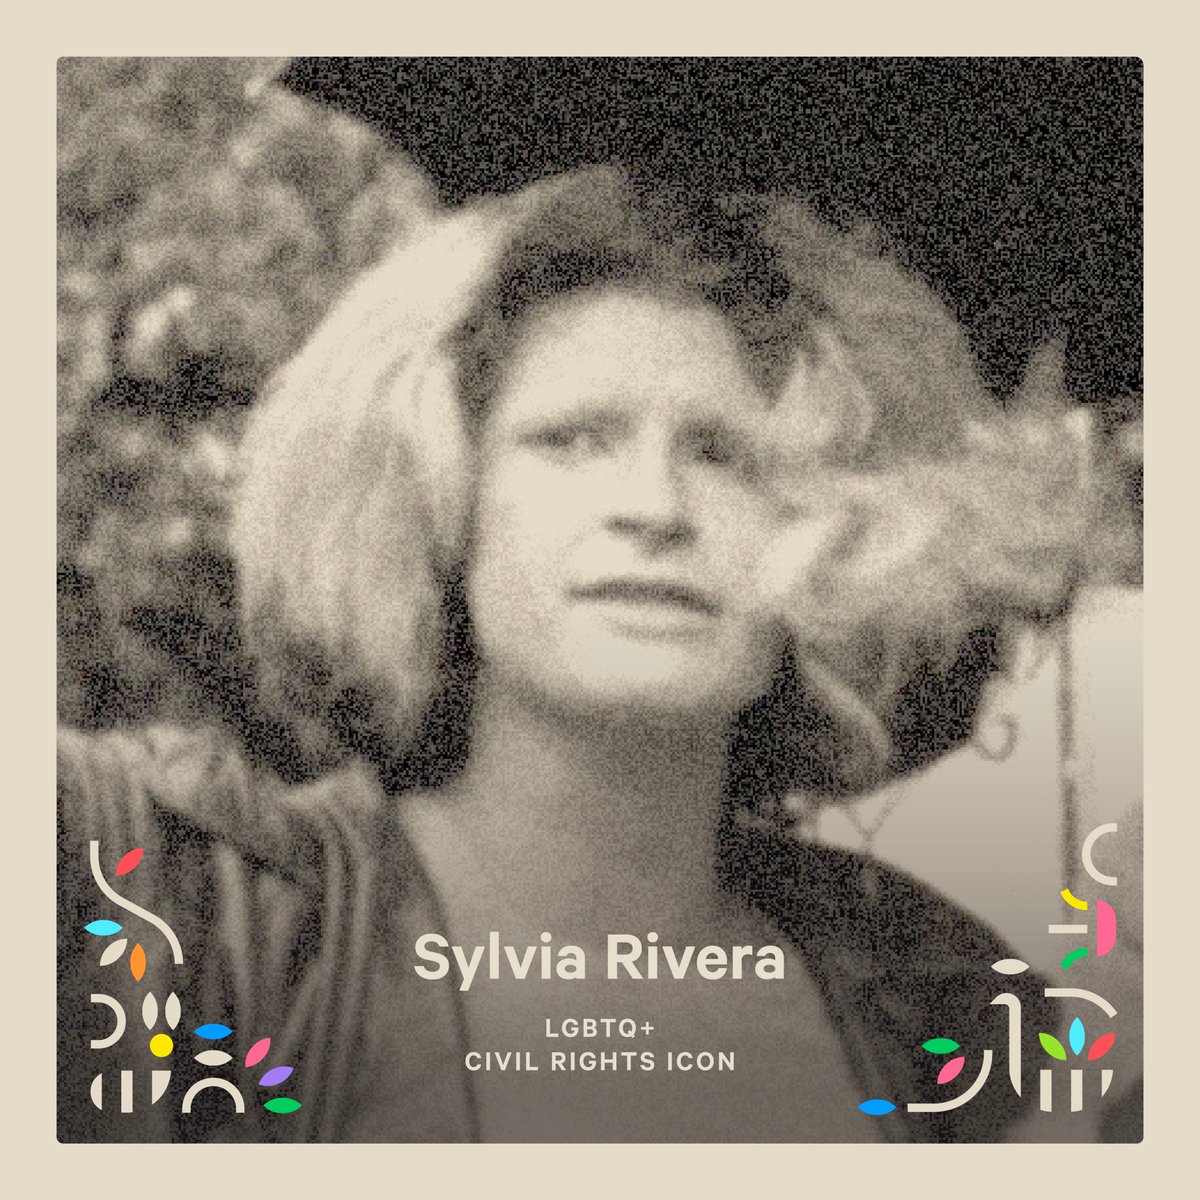 Sylvia Rivera was an American icon of the early LGBTQ+ liberation movement, with a specific focus on activism for LGBTQ+ people of color and LGBTQ+ people experiencing homelessness.